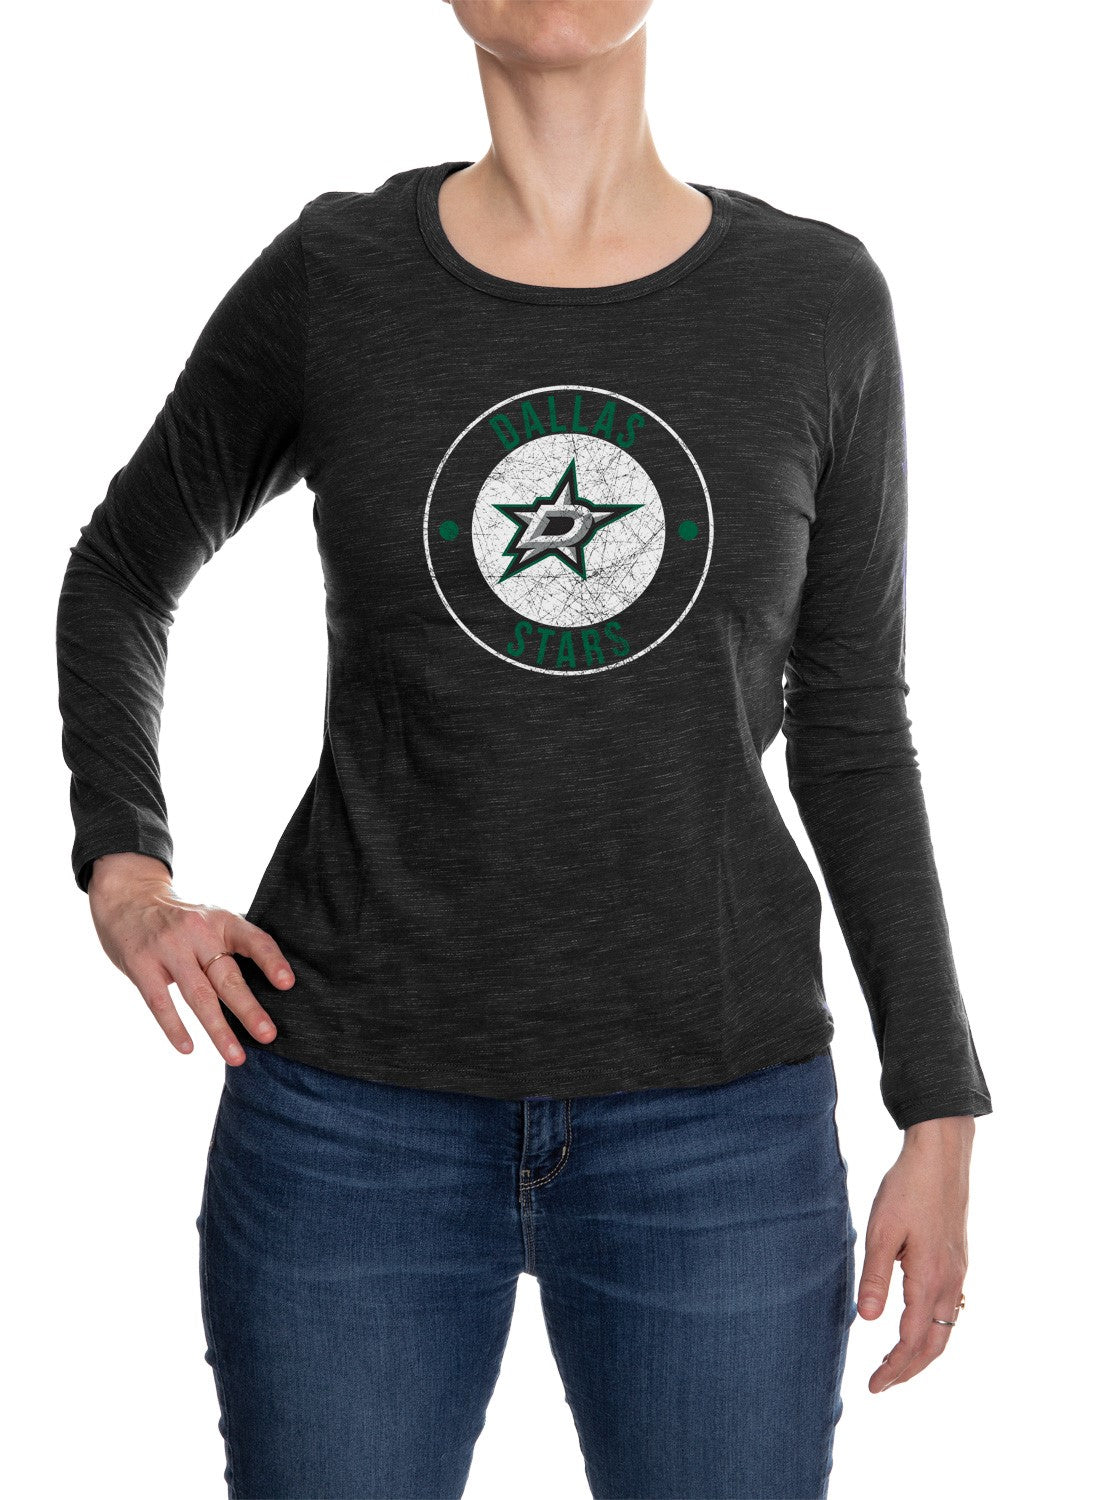 Dallas Stars Distressed Logo Long Sleeve Shirt for Women in Black Front View